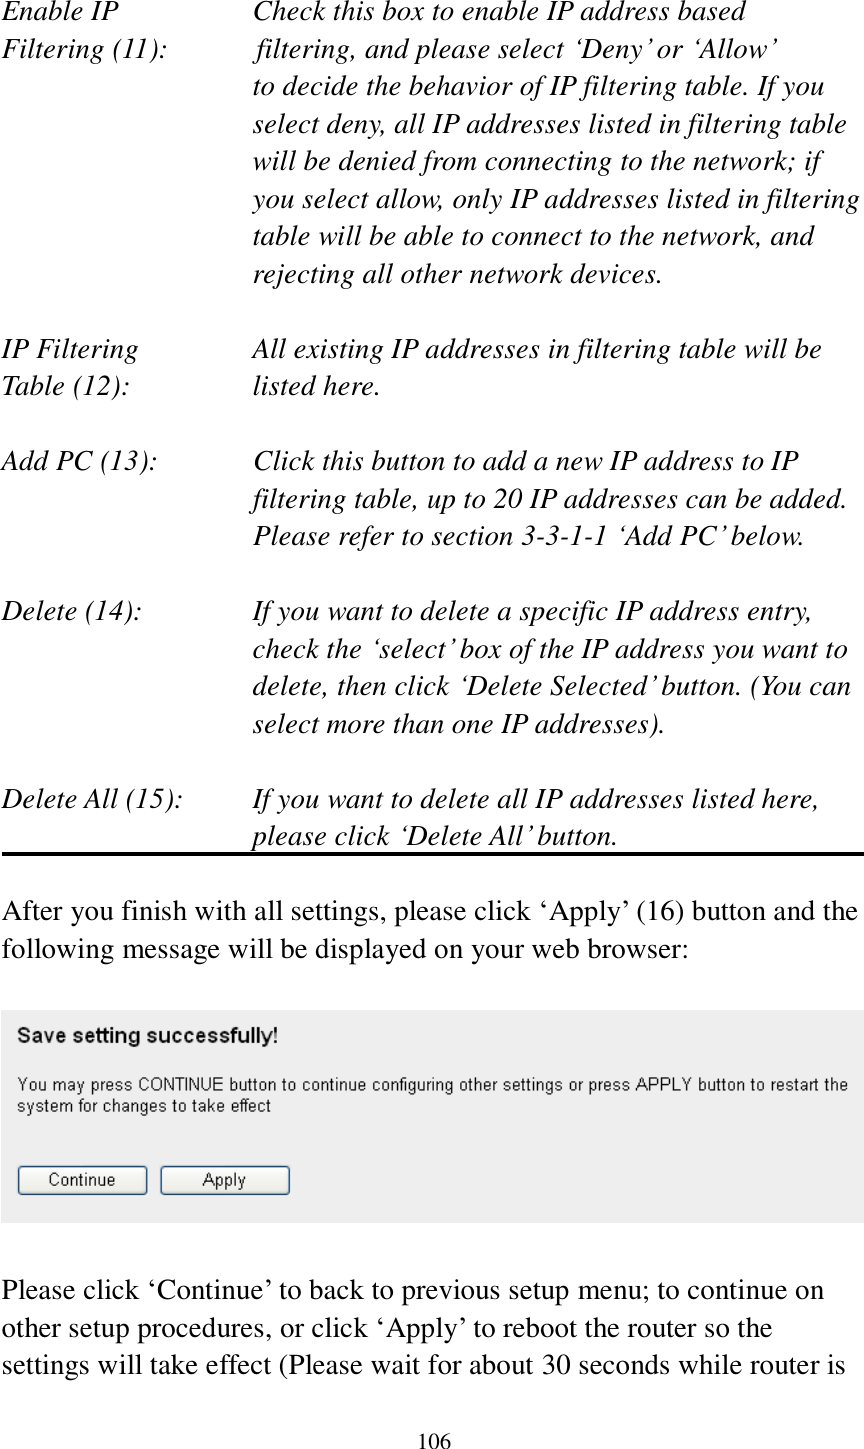 106  Enable IP        Check this box to enable IP address based Filtering (11):            filtering, and please select „Deny‟ or „Allow‟   to decide the behavior of IP filtering table. If you select deny, all IP addresses listed in filtering table will be denied from connecting to the network; if you select allow, only IP addresses listed in filtering table will be able to connect to the network, and rejecting all other network devices.  IP Filtering      All existing IP addresses in filtering table will be Table (12):       listed here.  Add PC (13):    Click this button to add a new IP address to IP filtering table, up to 20 IP addresses can be added.   Please refer to section 3-3-1-1 „Add PC‟ below.    Delete (14):      If you want to delete a specific IP address entry,     check the „select‟ box of the IP address you want to delete, then click „Delete Selected‟ button. (You can select more than one IP addresses).  Delete All (15):    If you want to delete all IP addresses listed here, please click „Delete All‟ button.  After you finish with all settings, please click „Apply‟ (16) button and the following message will be displayed on your web browser:    Please click „Continue‟ to back to previous setup menu; to continue on other setup procedures, or click „Apply‟ to reboot the router so the settings will take effect (Please wait for about 30 seconds while router is 